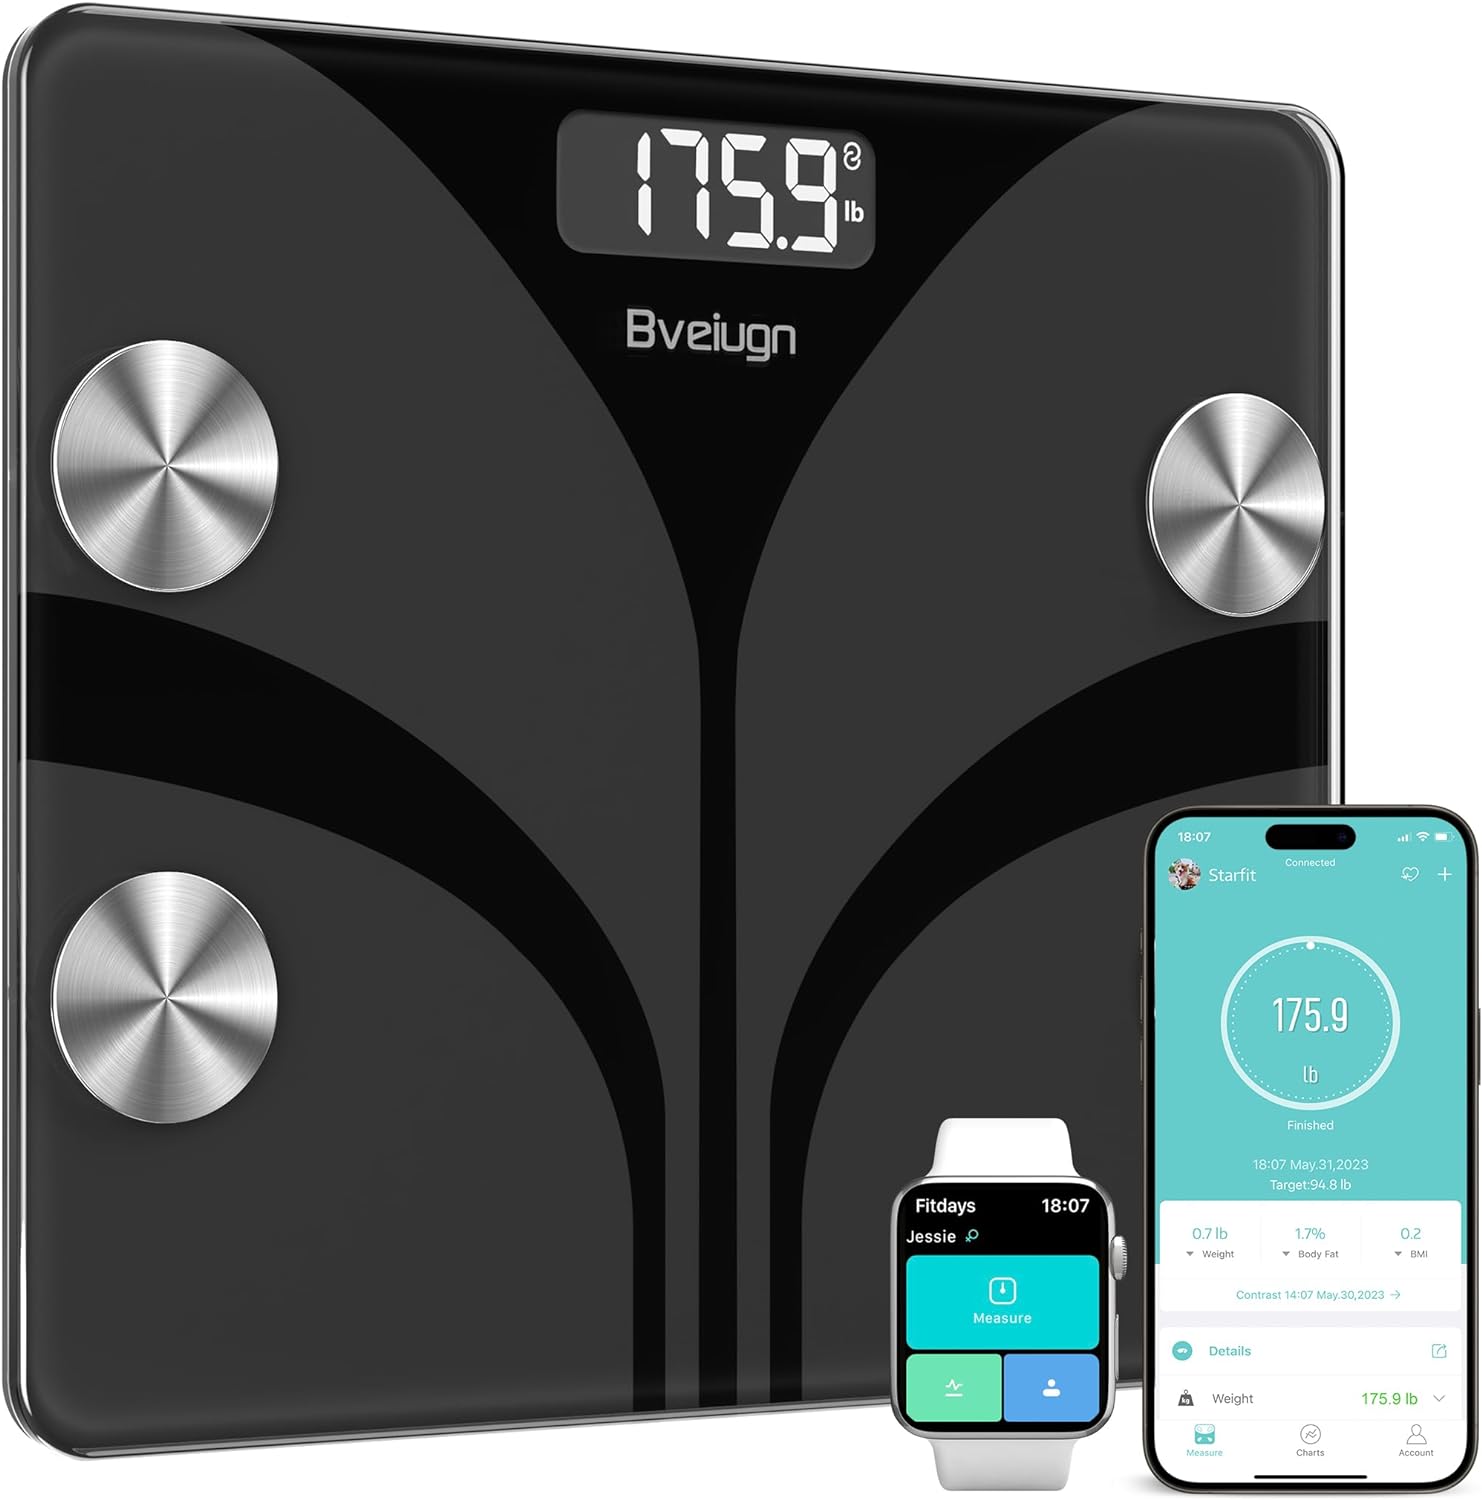 New Offers to Score! Act Fast and Save Big on the Bveiugn Digital Bathroom Smart Scale